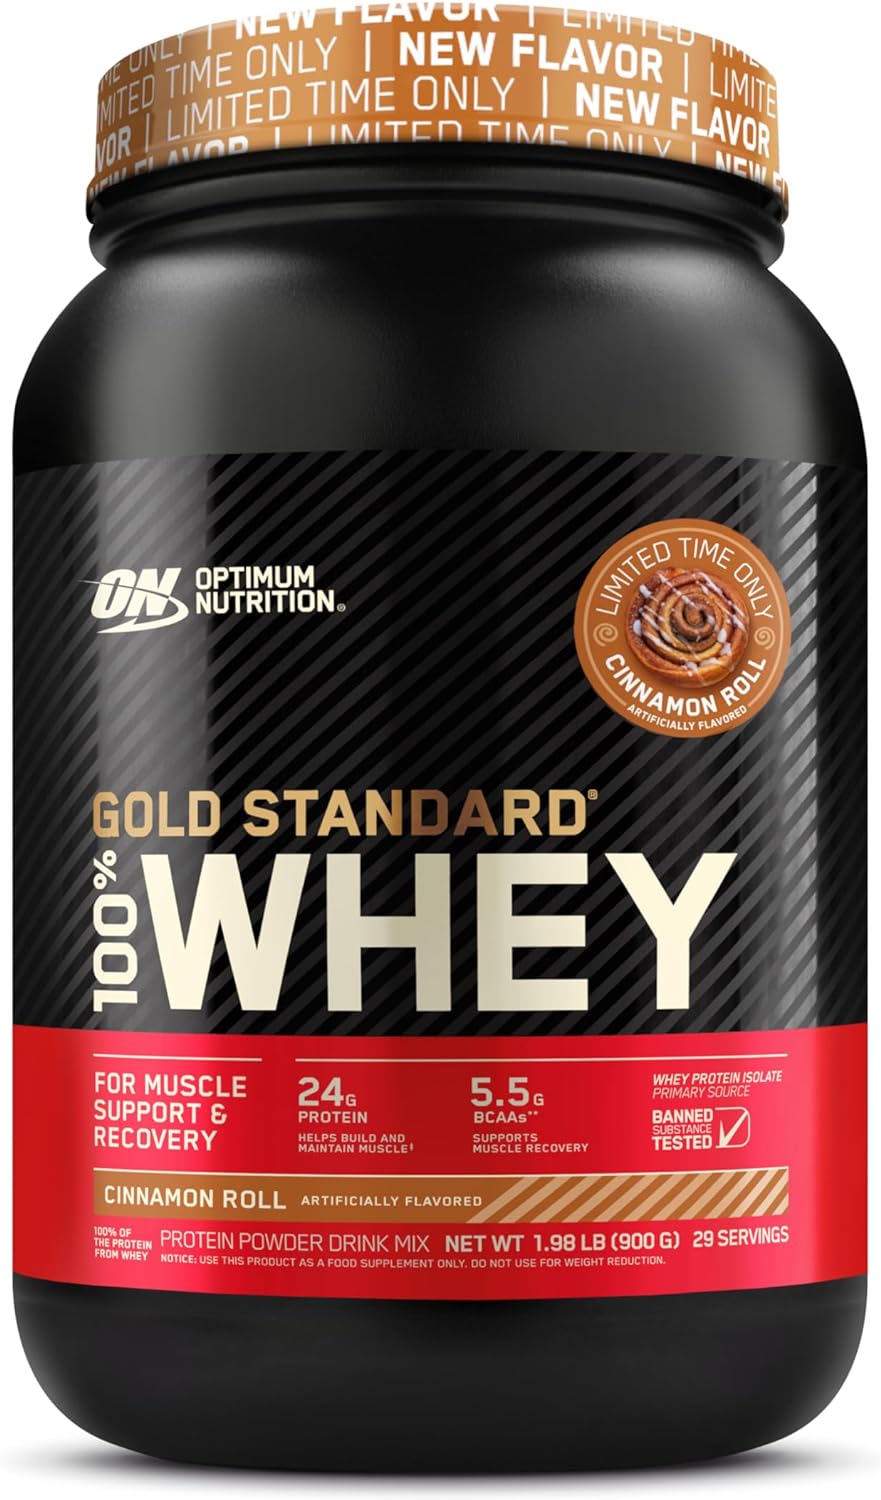 Optimum Nutrition New Flavor Gold Standard 100% Whey Protein Powder, Cinnamon Roll, 2 Pound (Packaging May Vary)